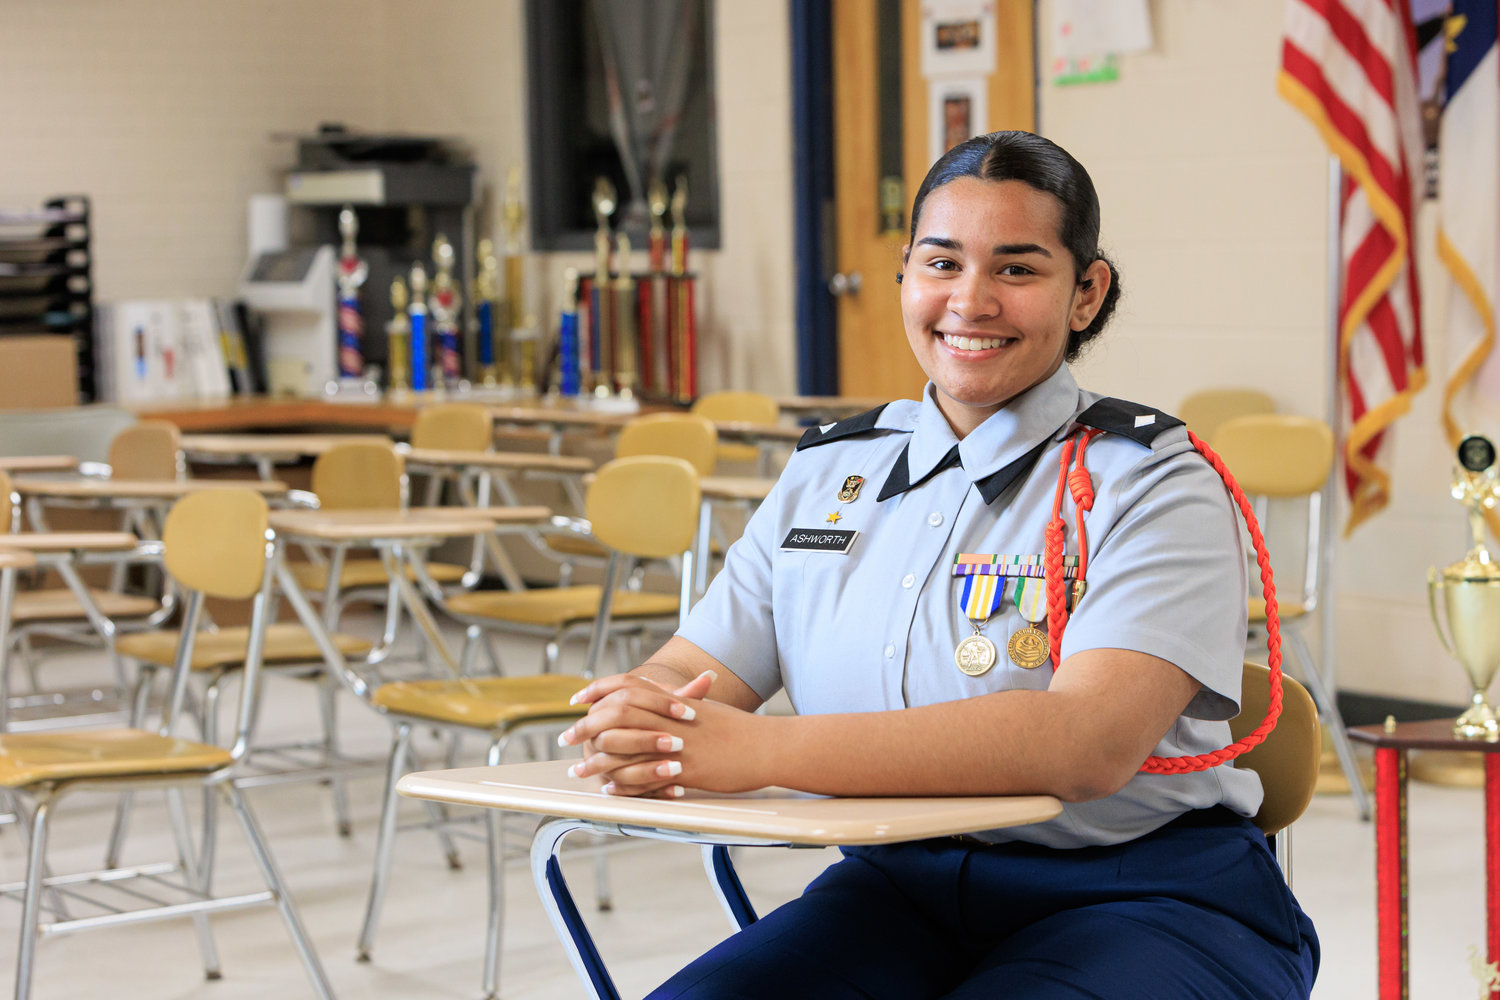 Trinity Ashworth, the battalion commander for the JROTC program at South View High School, plans to enlist in the Navy.